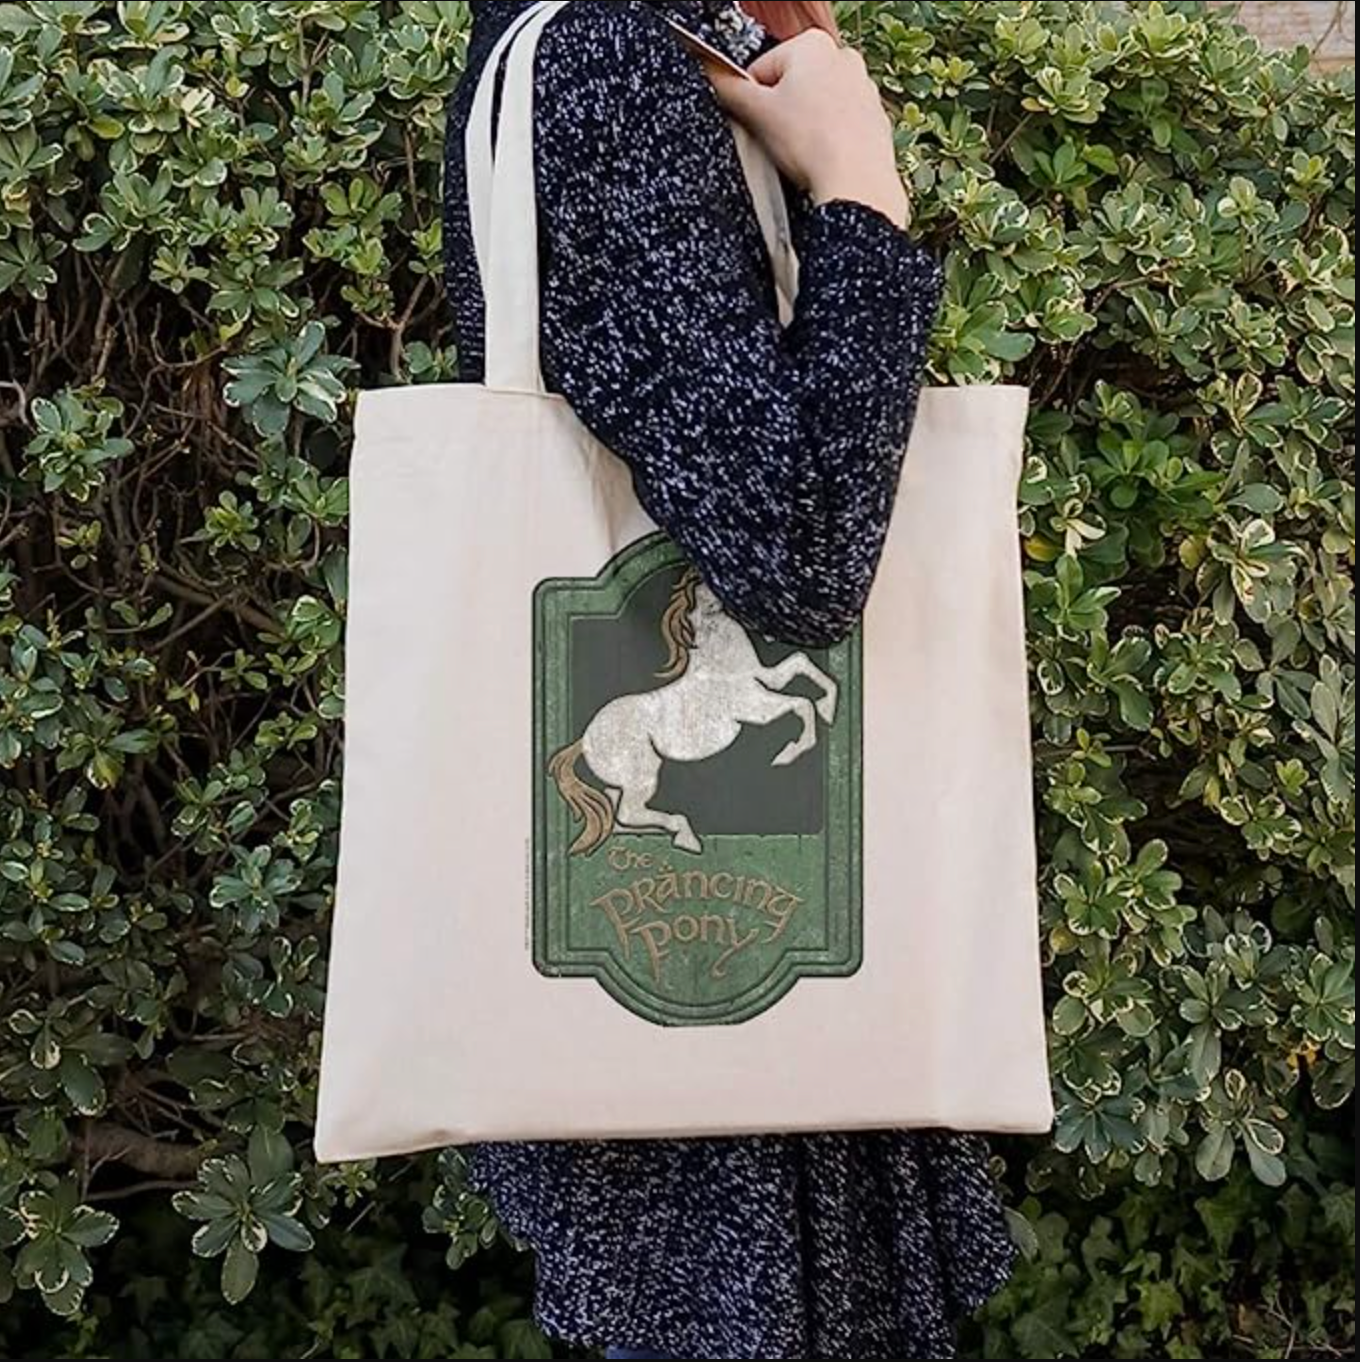 Lord of the Rings Tote Bags